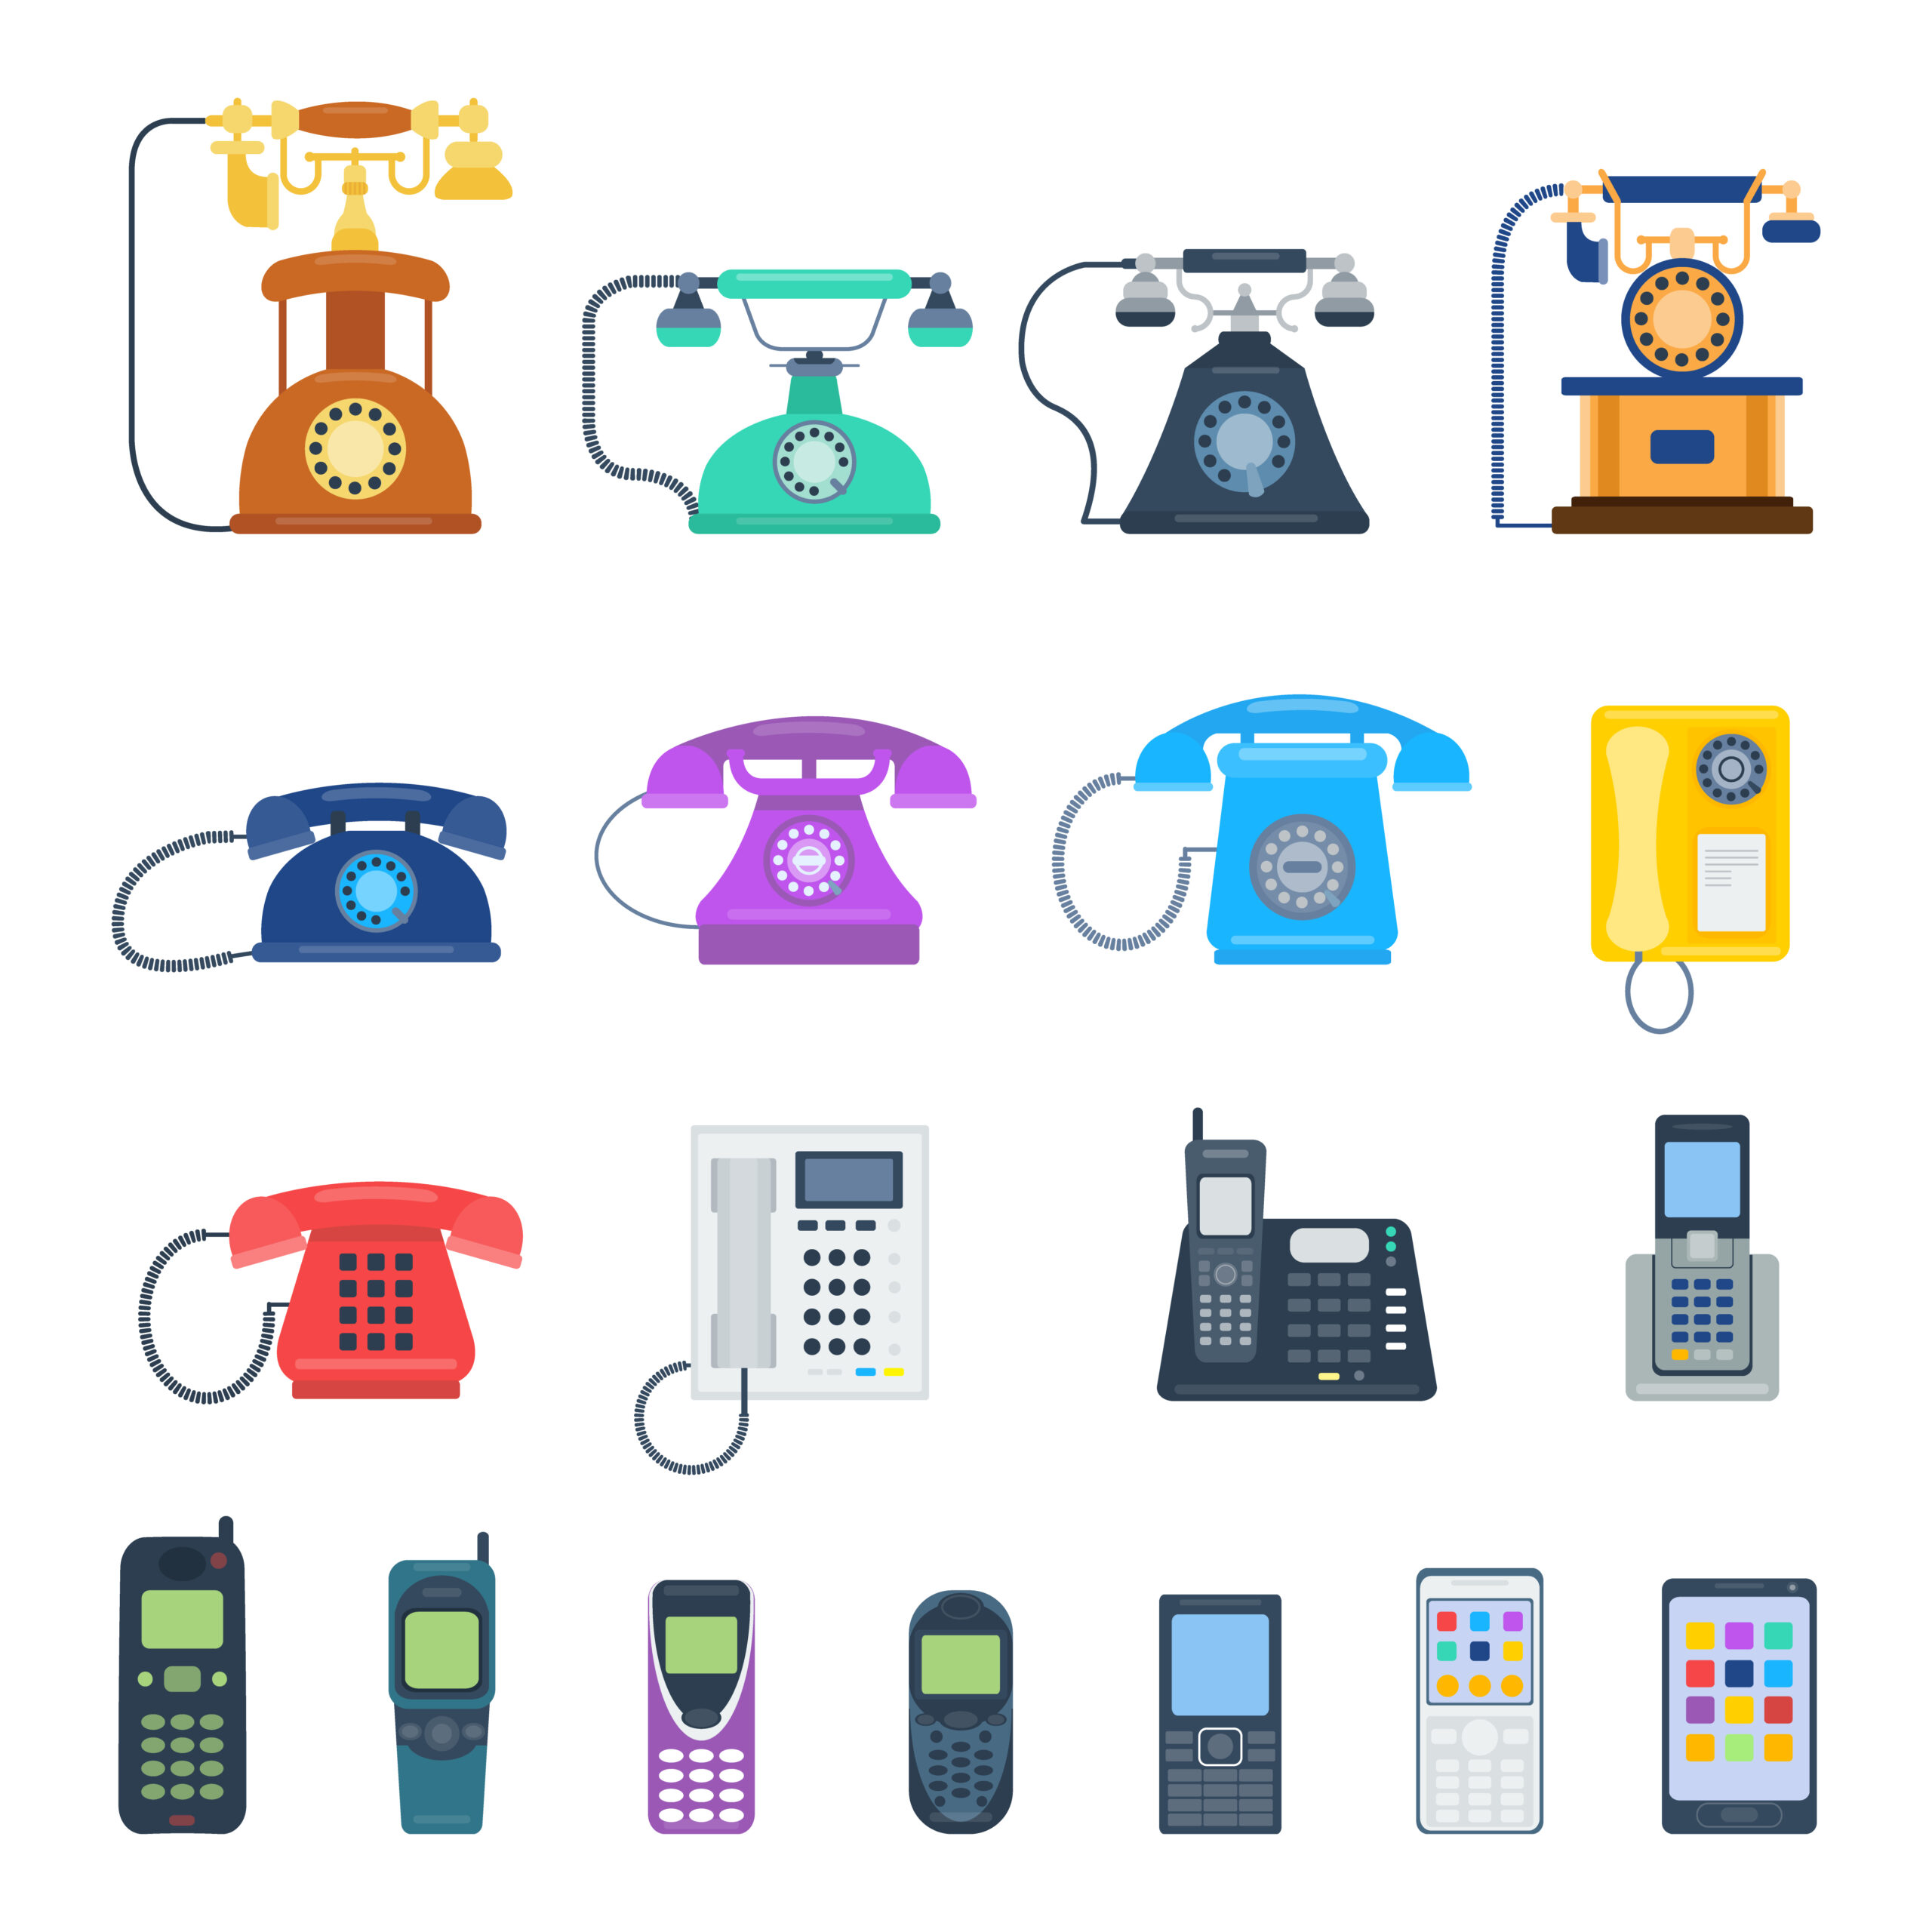 phone designs throughout time graphic